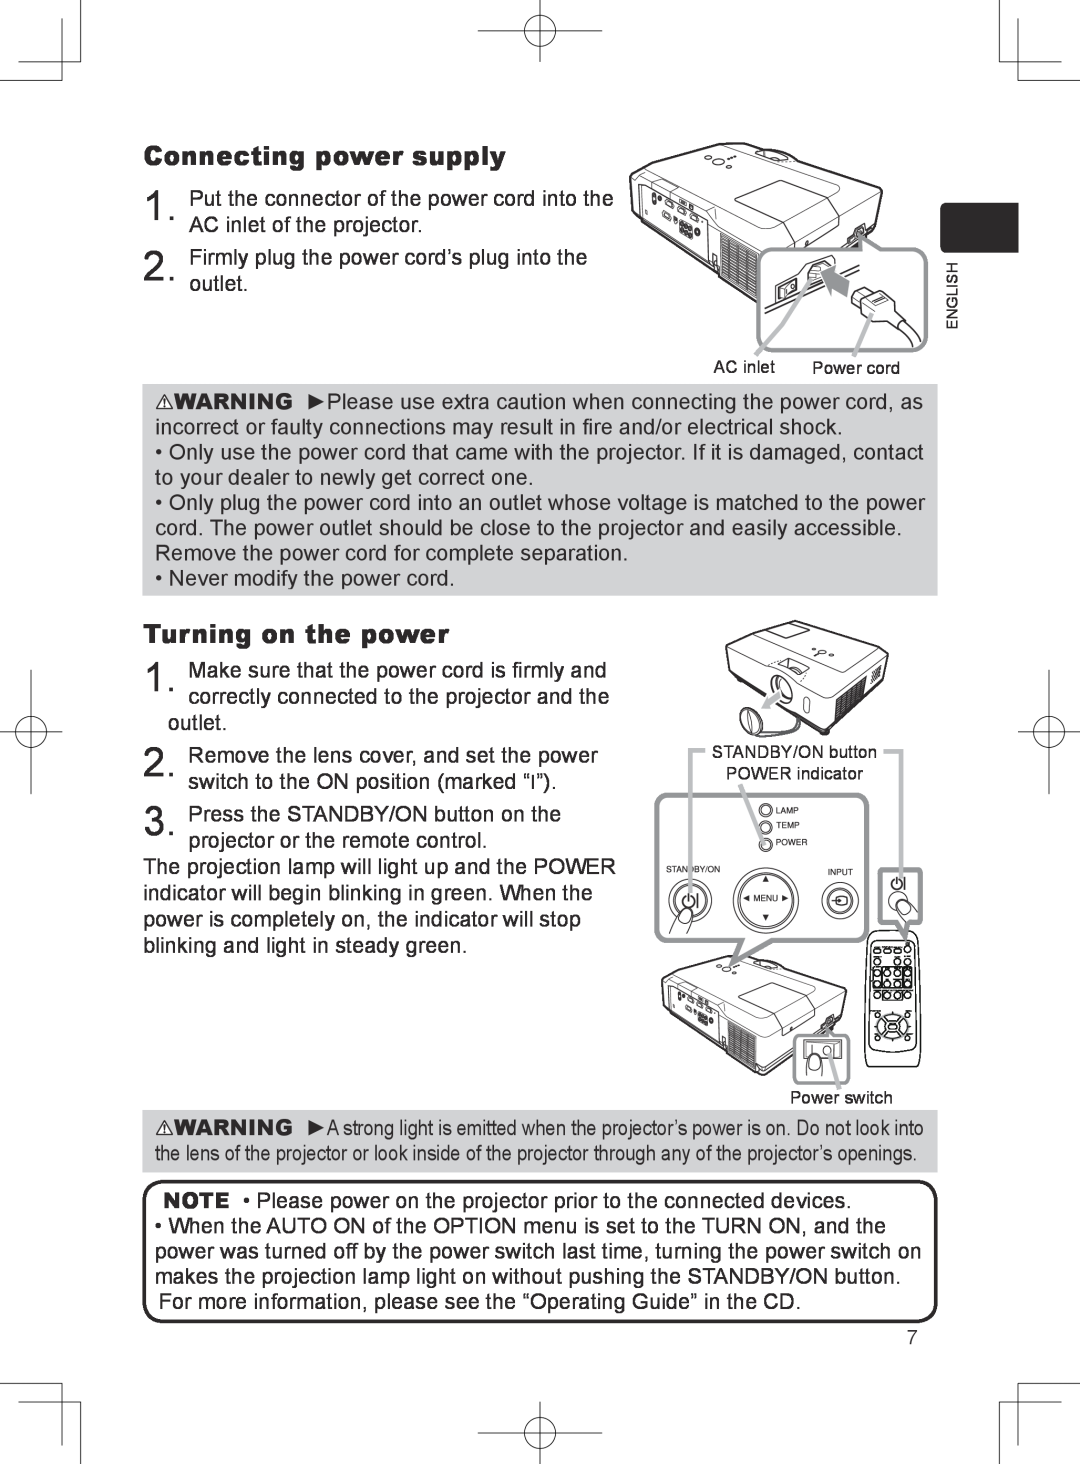 Dukane 8781 user manual Connecting power supply, Turning on the power 